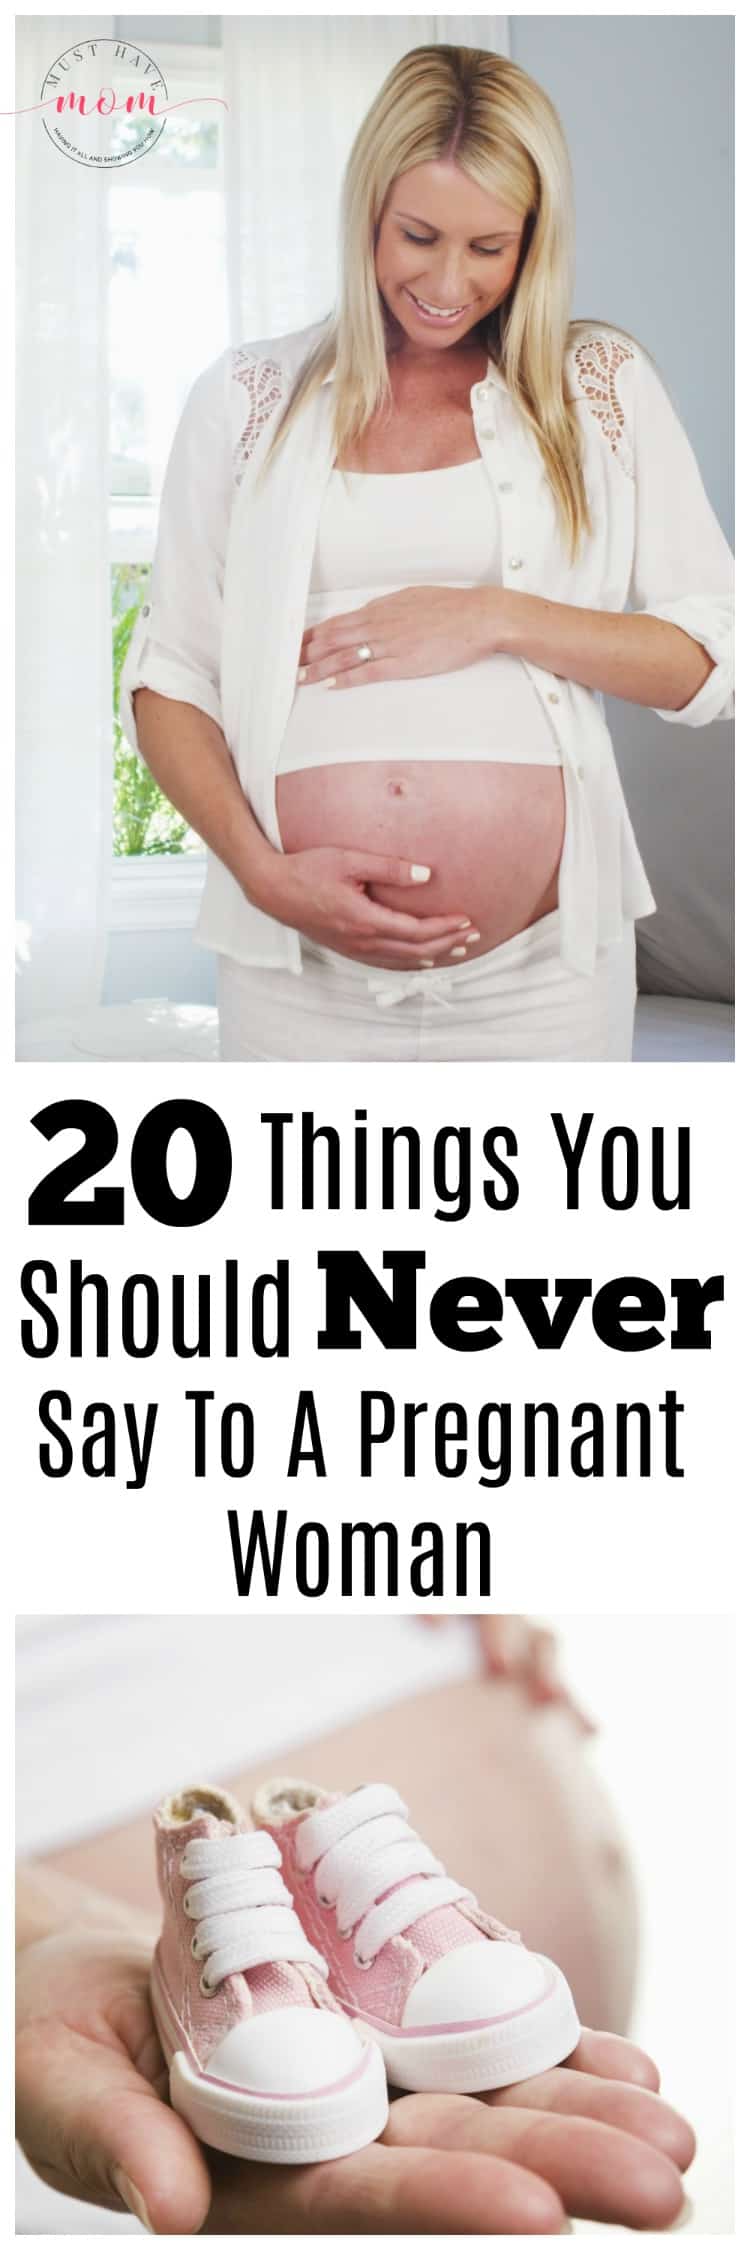 20 Things you should never say to a pregnant woman! Funny